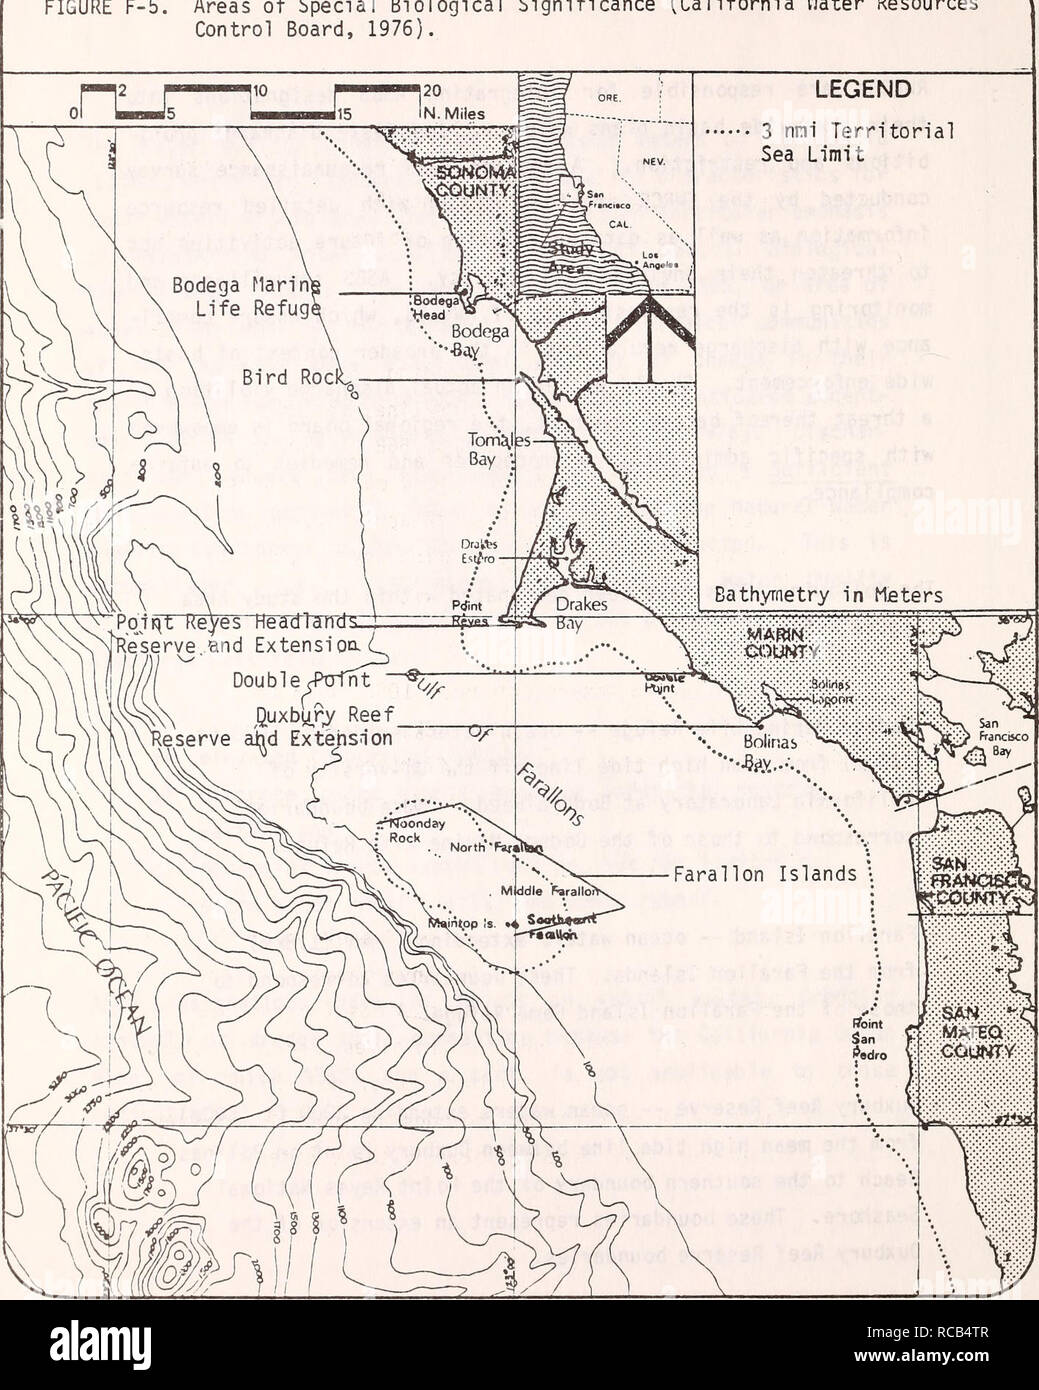 . Draft environmental impact statement prepared on the proposed Point Reyes/Farallon Islands Marine Sanctuary / U.S. Department of Commerce, National Oceanic and Atmospheric Administration, Office of Coastal Zone Management. Marine parks and reserves California.. FIGURE F-5. Areas of Special Biological Significance (California Water Resources Control Board, 1976).. F-24. Please note that these images are extracted from scanned page images that may have been digitally enhanced for readability - coloration and appearance of these illustrations may not perfectly resemble the original work.. Natio Stock Photo